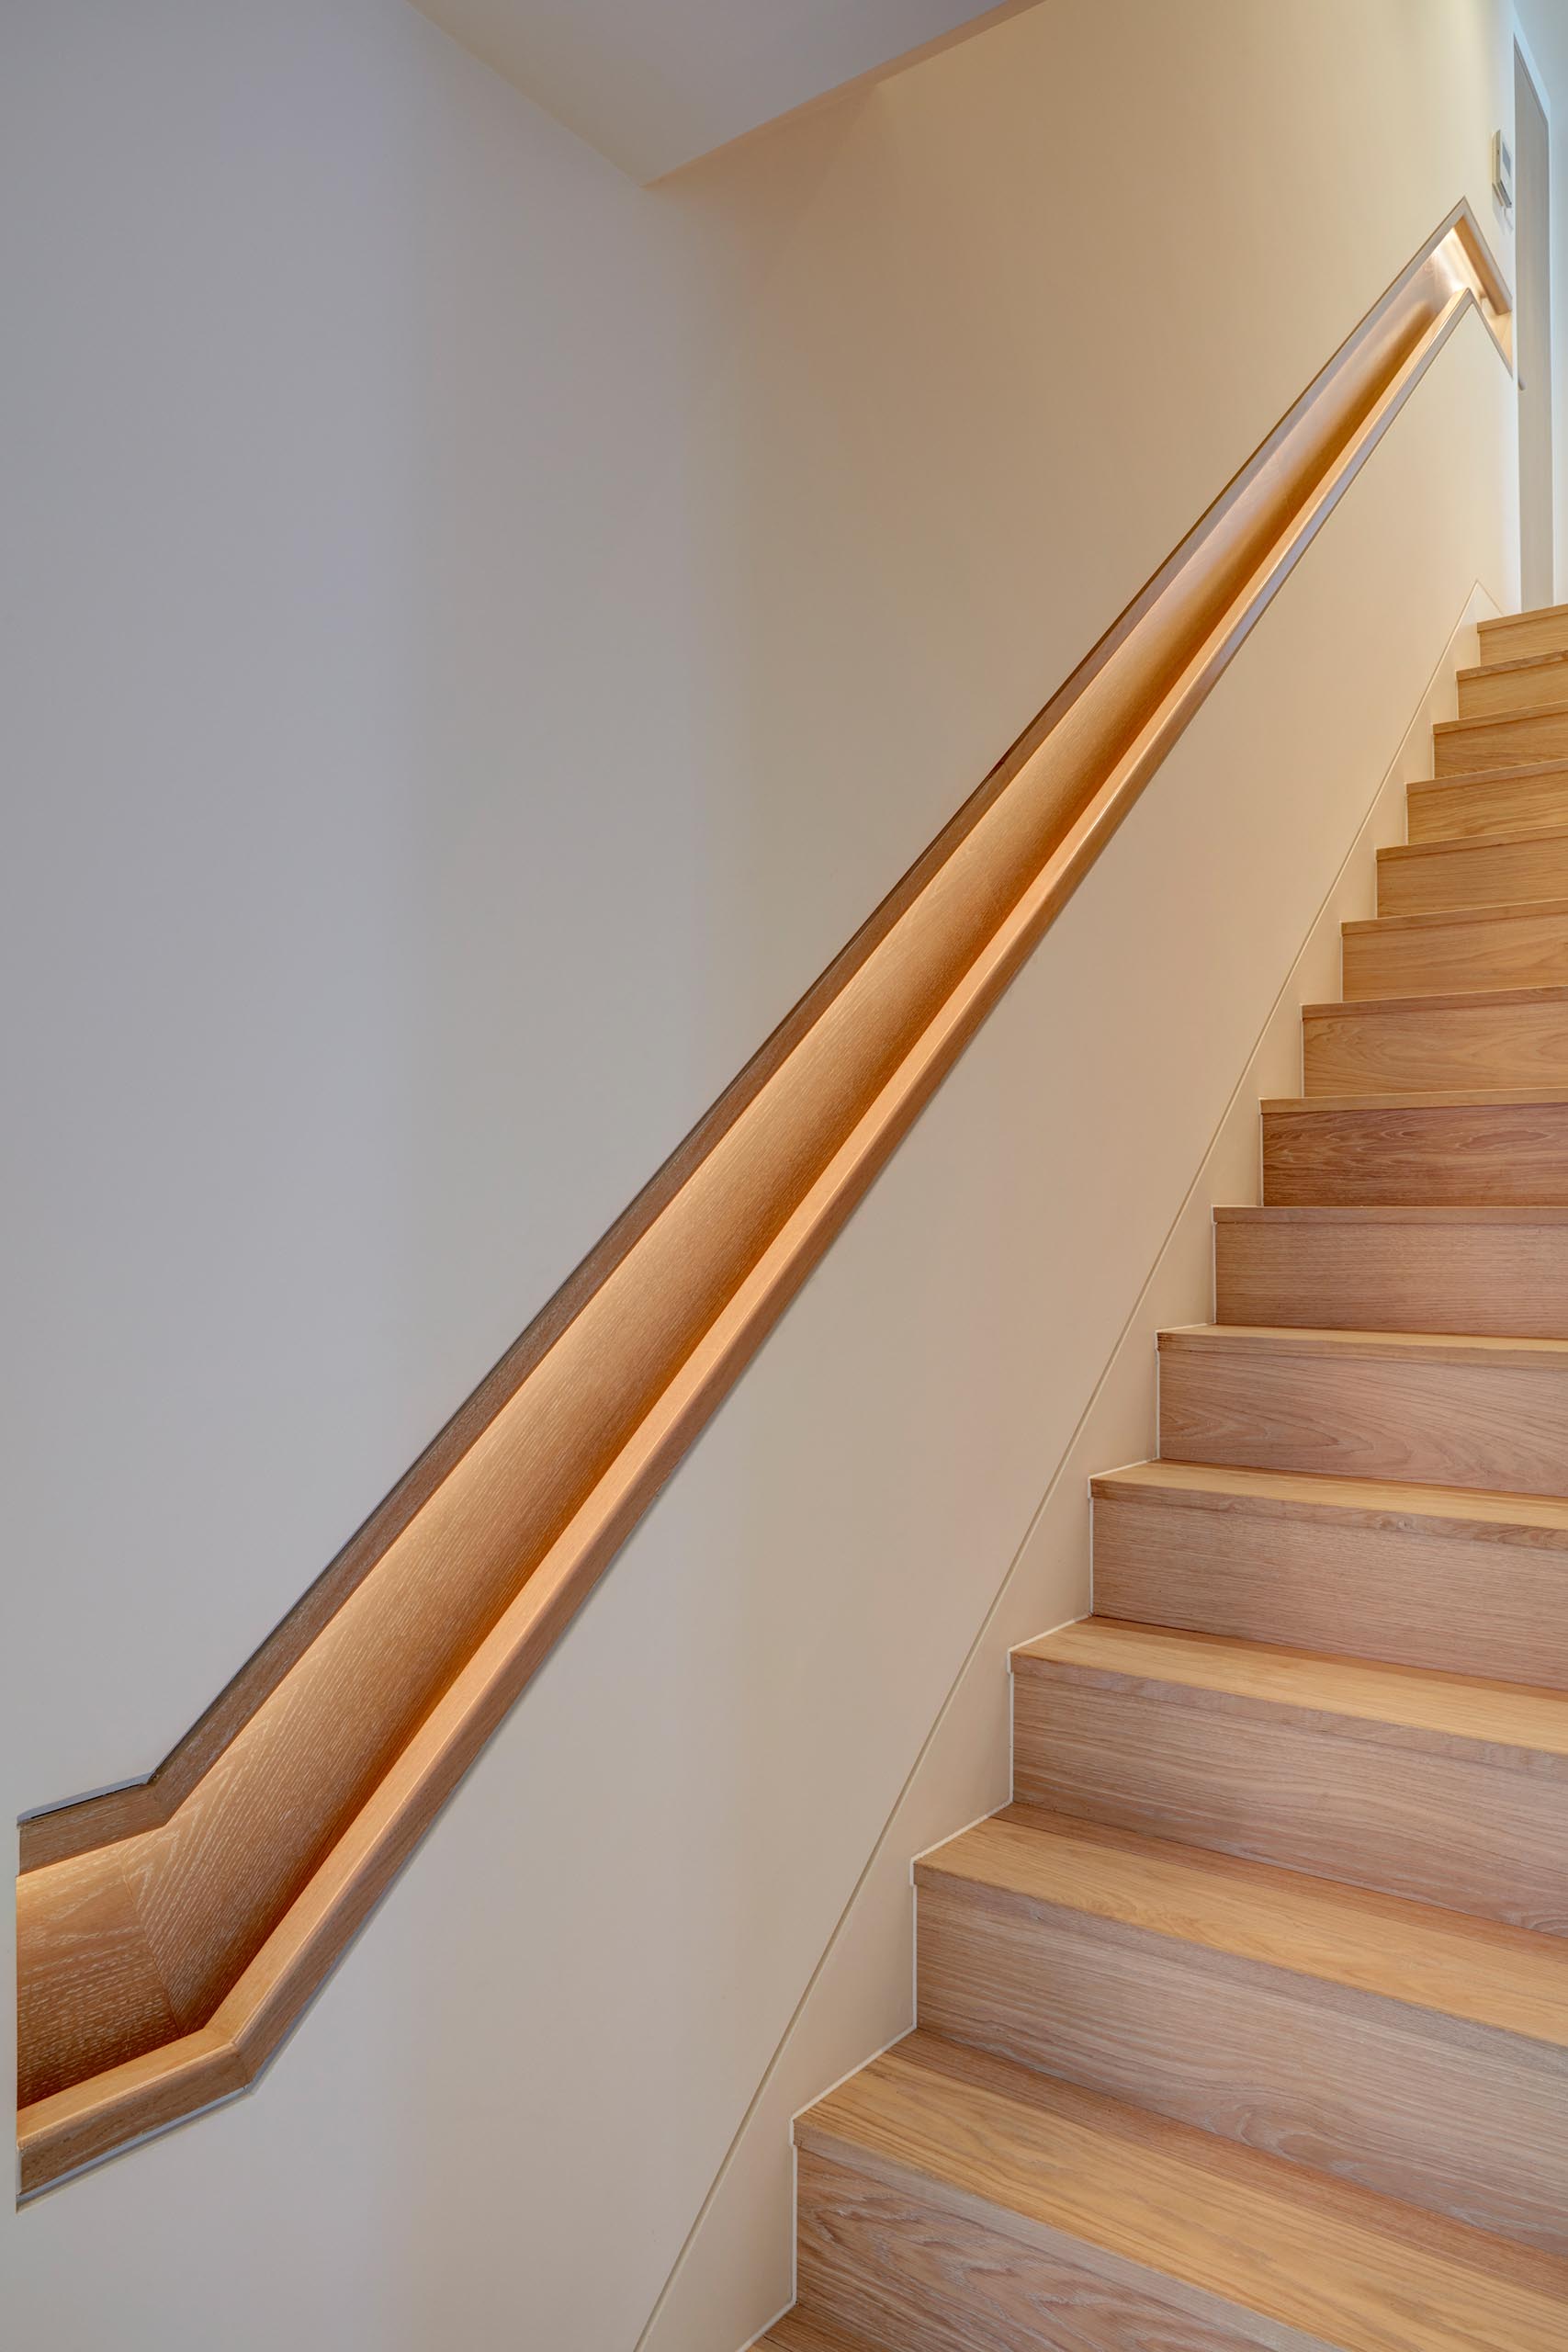 Modern wood stairs and a matching wood handrail with hidden lighting.